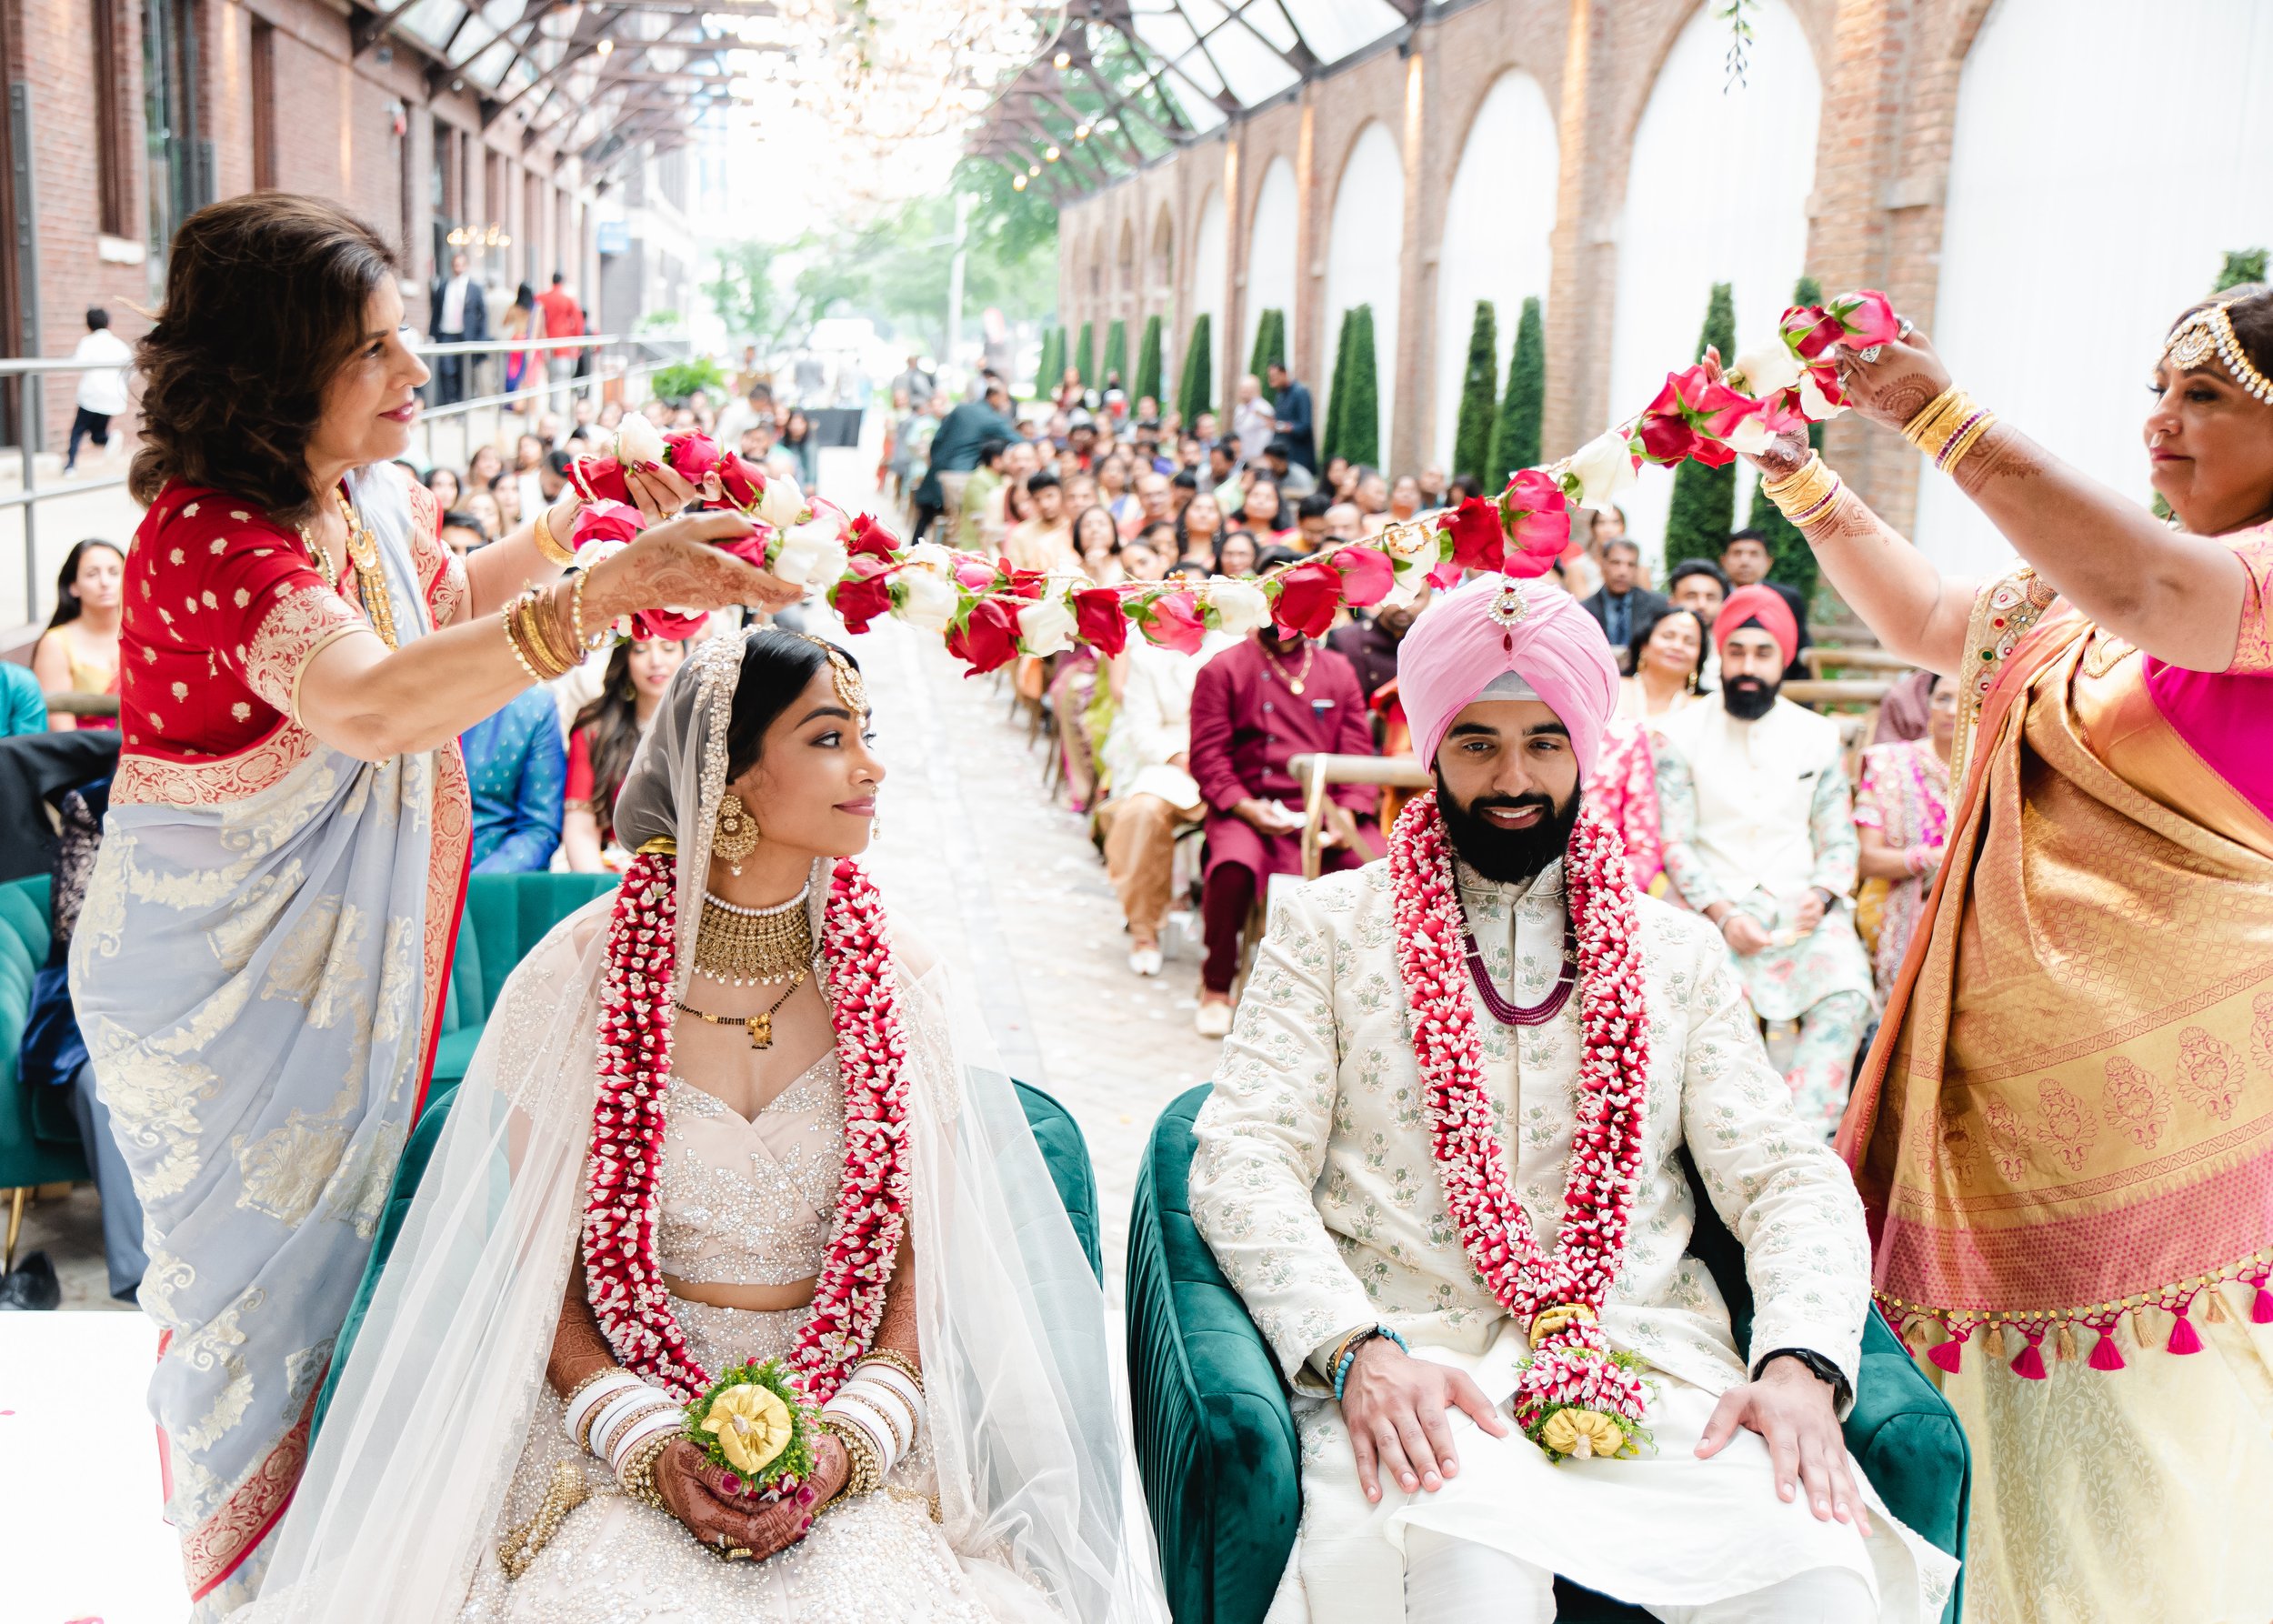  An Hindu Sikh fusion wedding ceremony: The couple shares an amused glance as their mothers lay flowers on them 